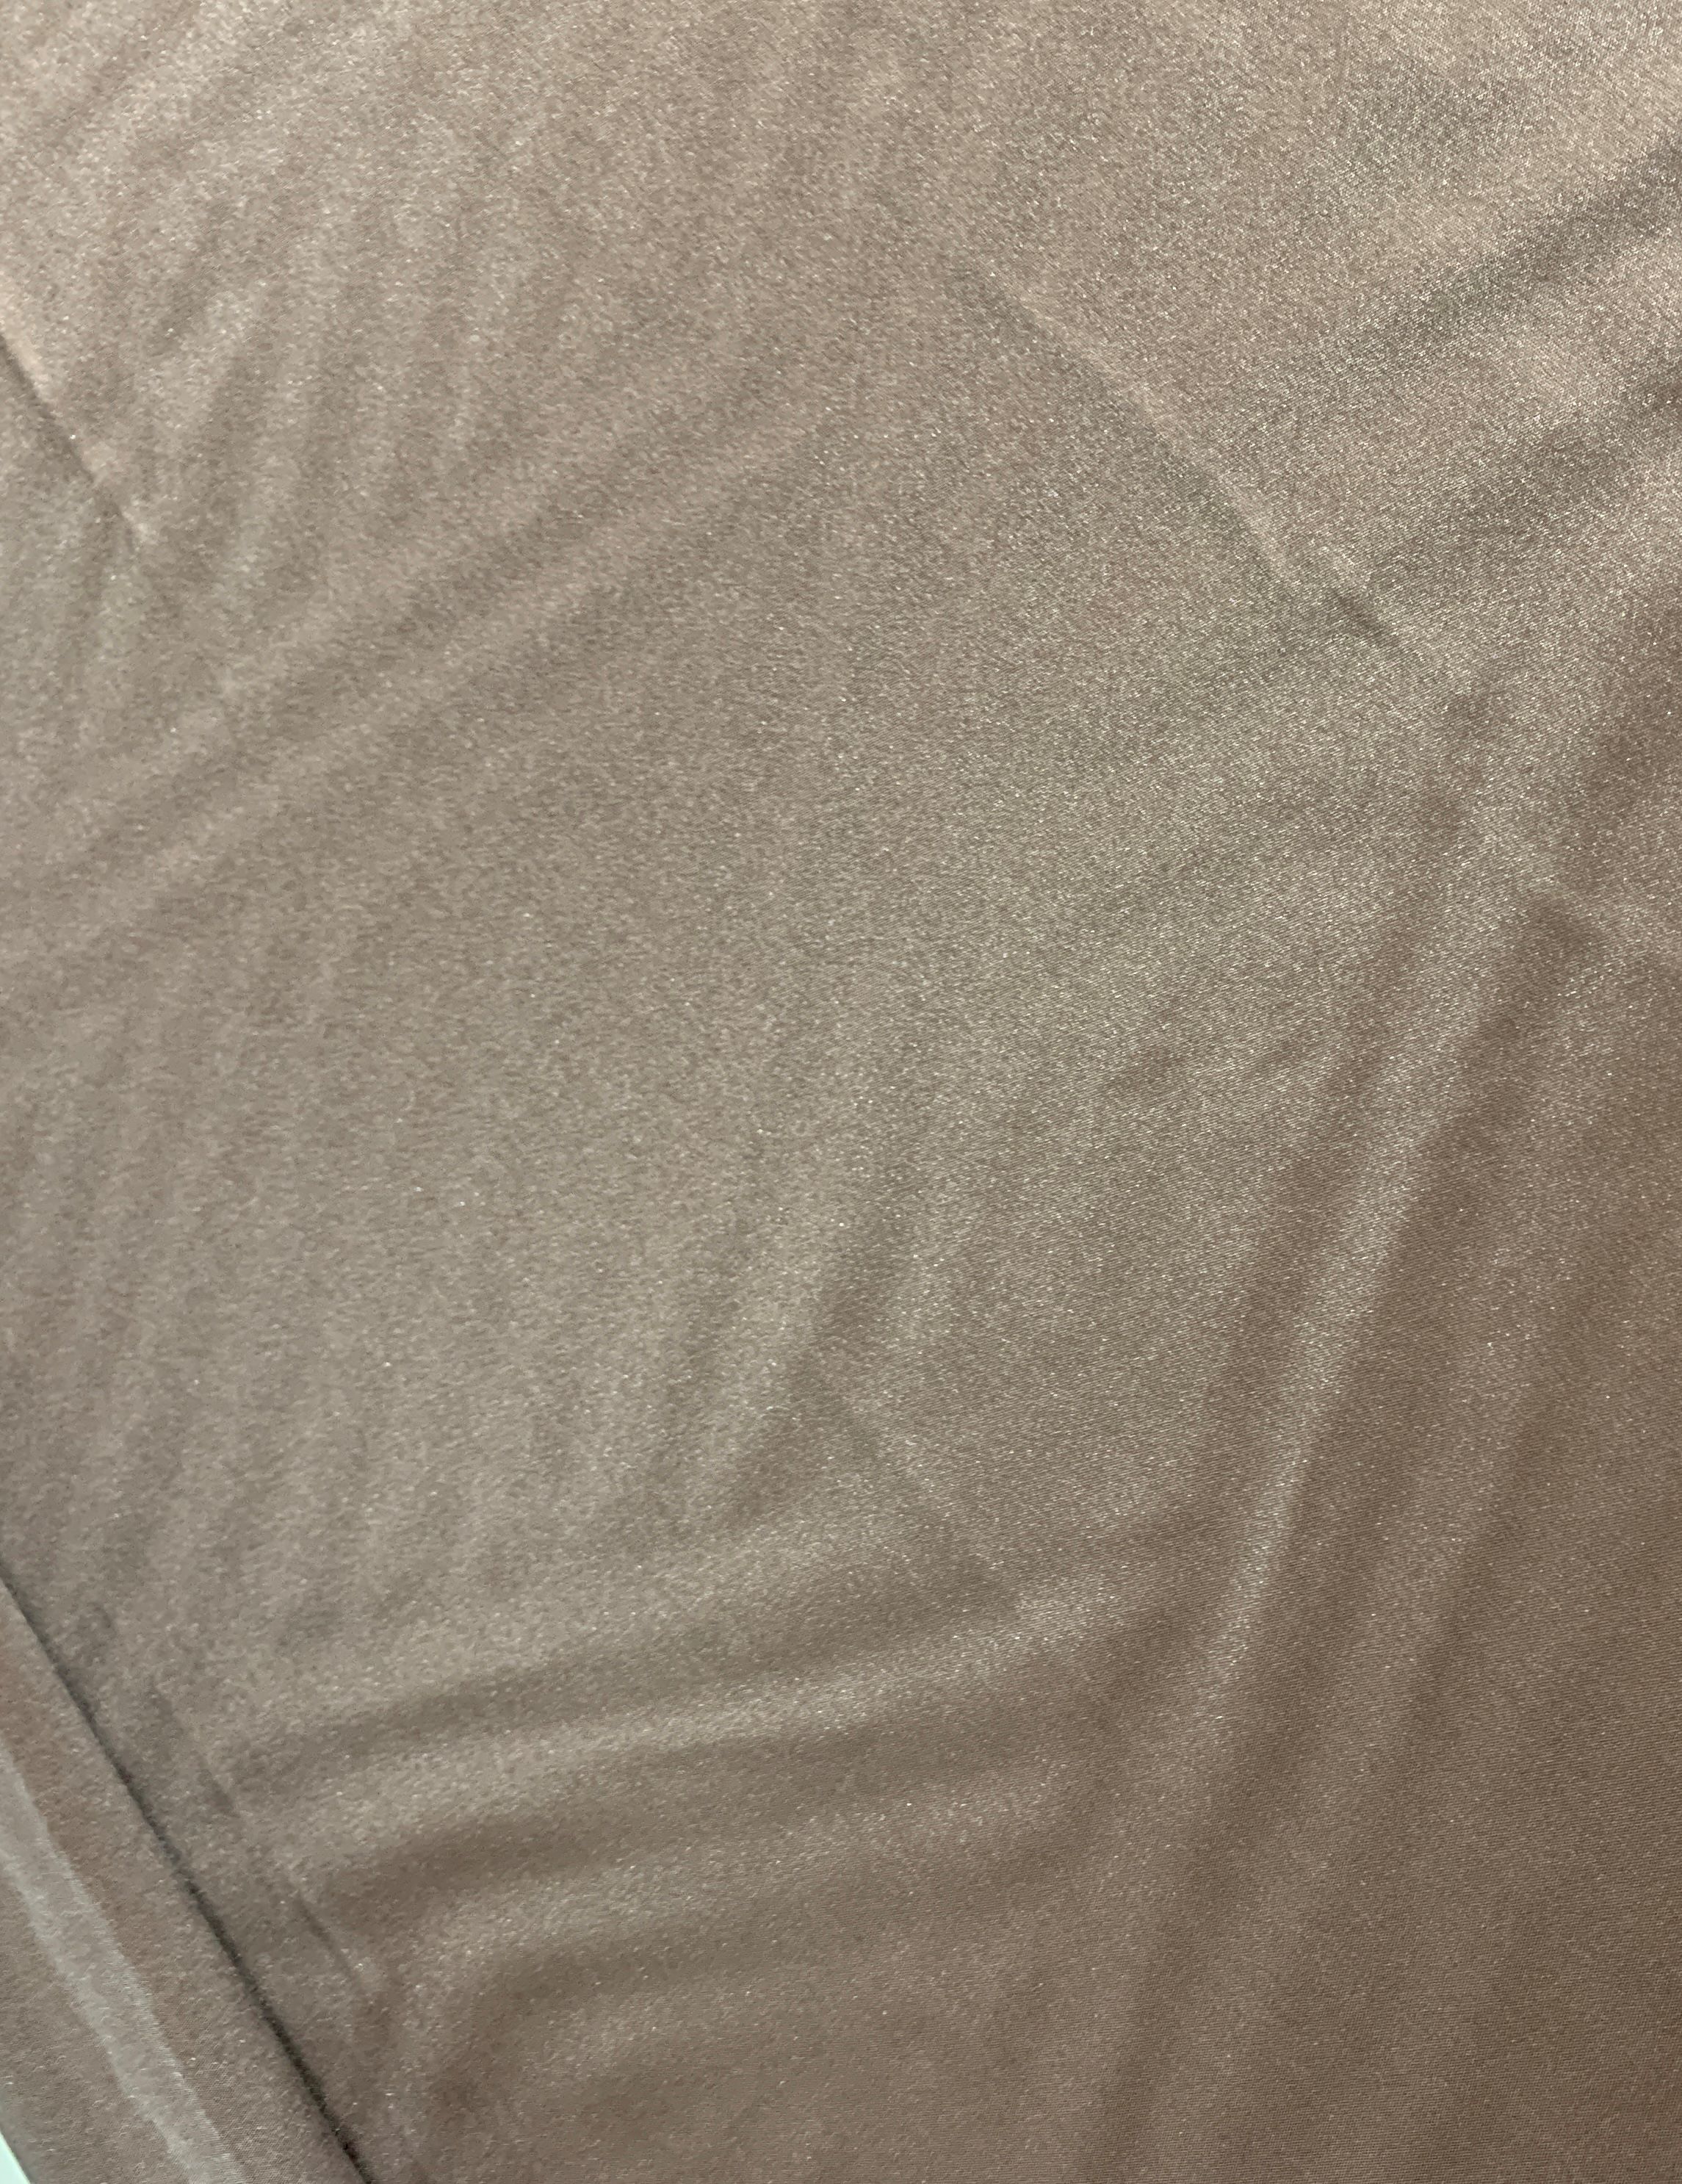 Brown Lining Fabric